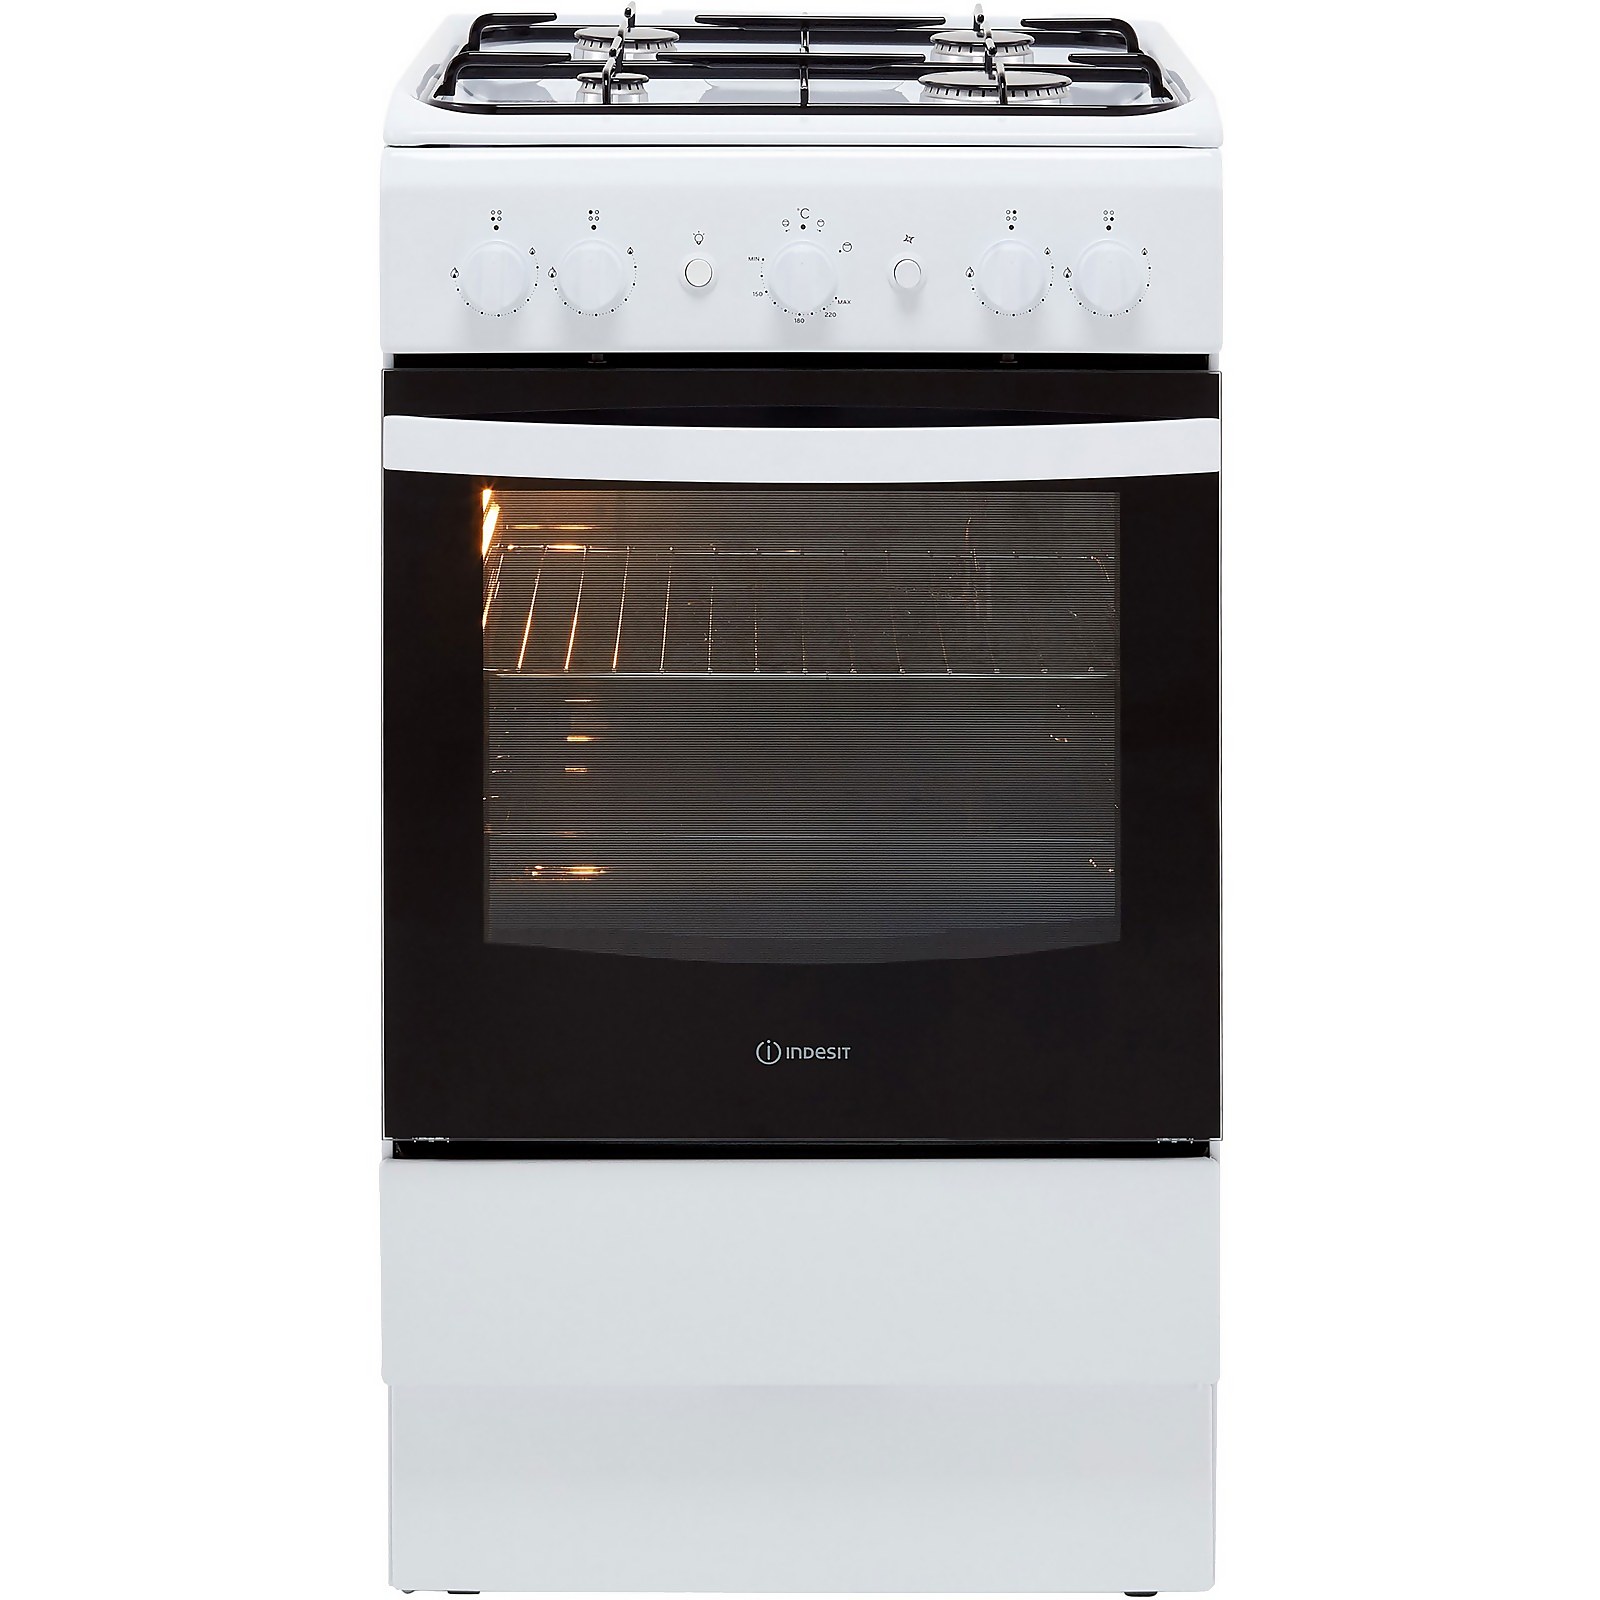 Photo of Indesit Cloe Is5g1kmw 50cm Gas Cooker - White